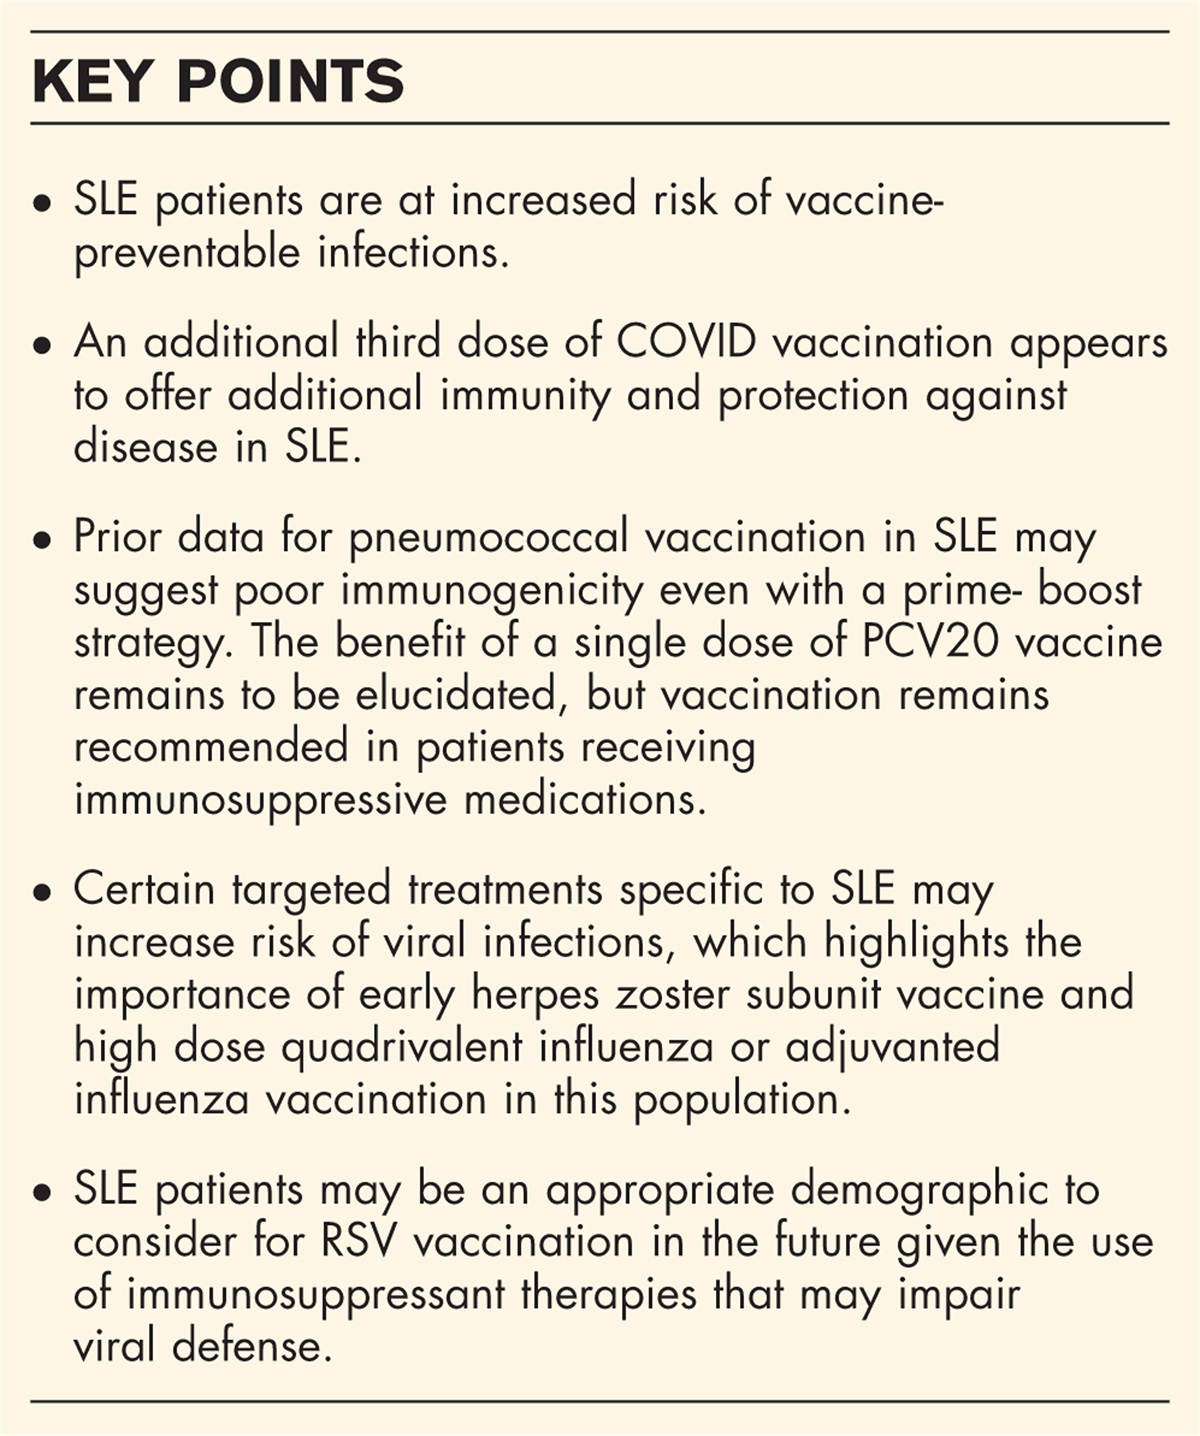 Vaccination updates and special considerations for systemic lupus erythematosus patients